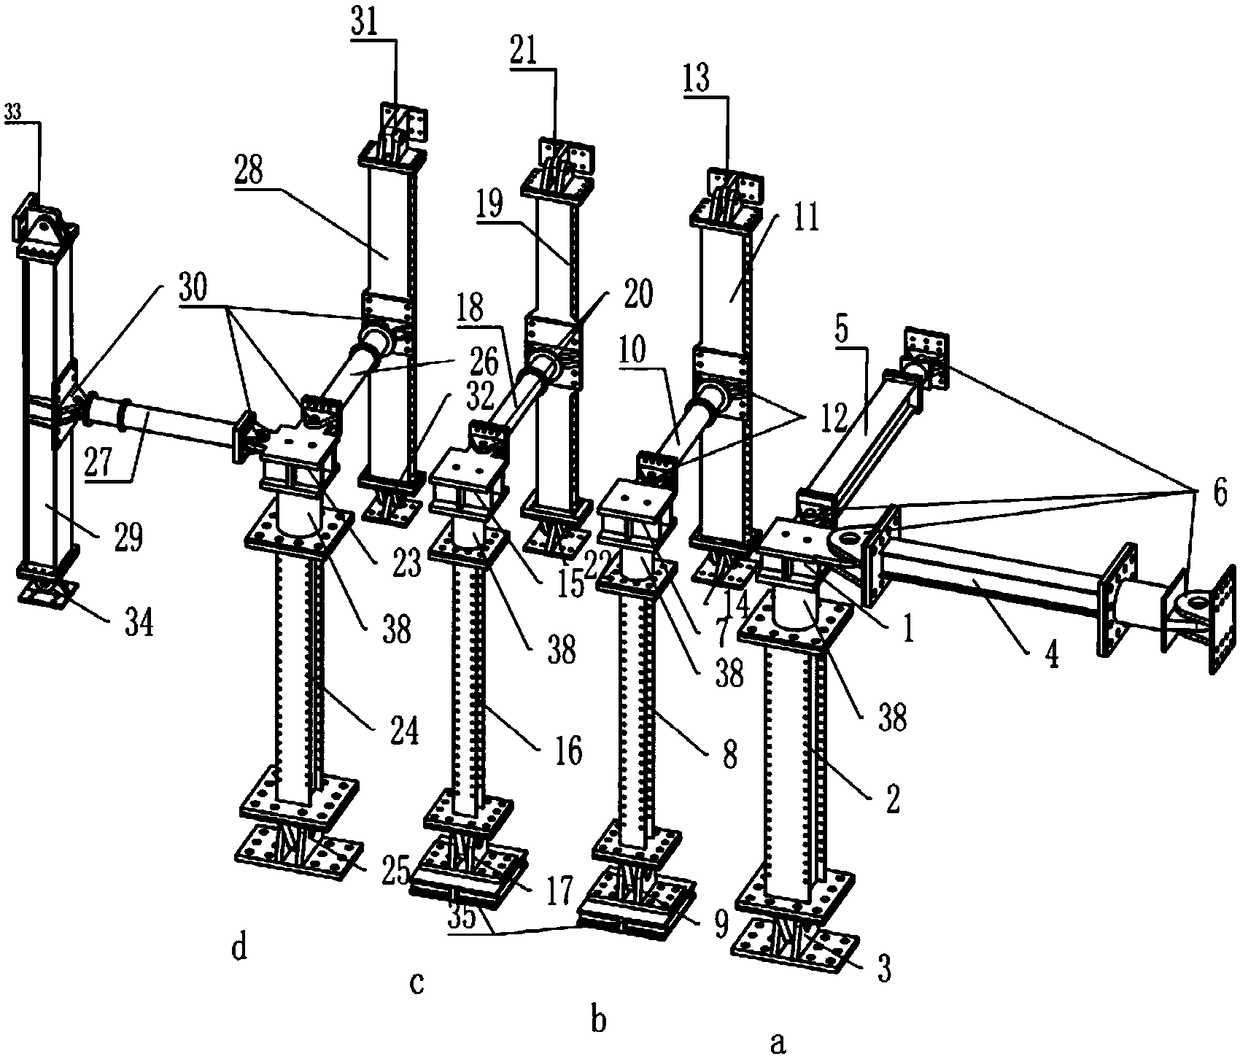 Adjustable stiffness support system for aircraft vertical stabilizer-fuselage strength testing